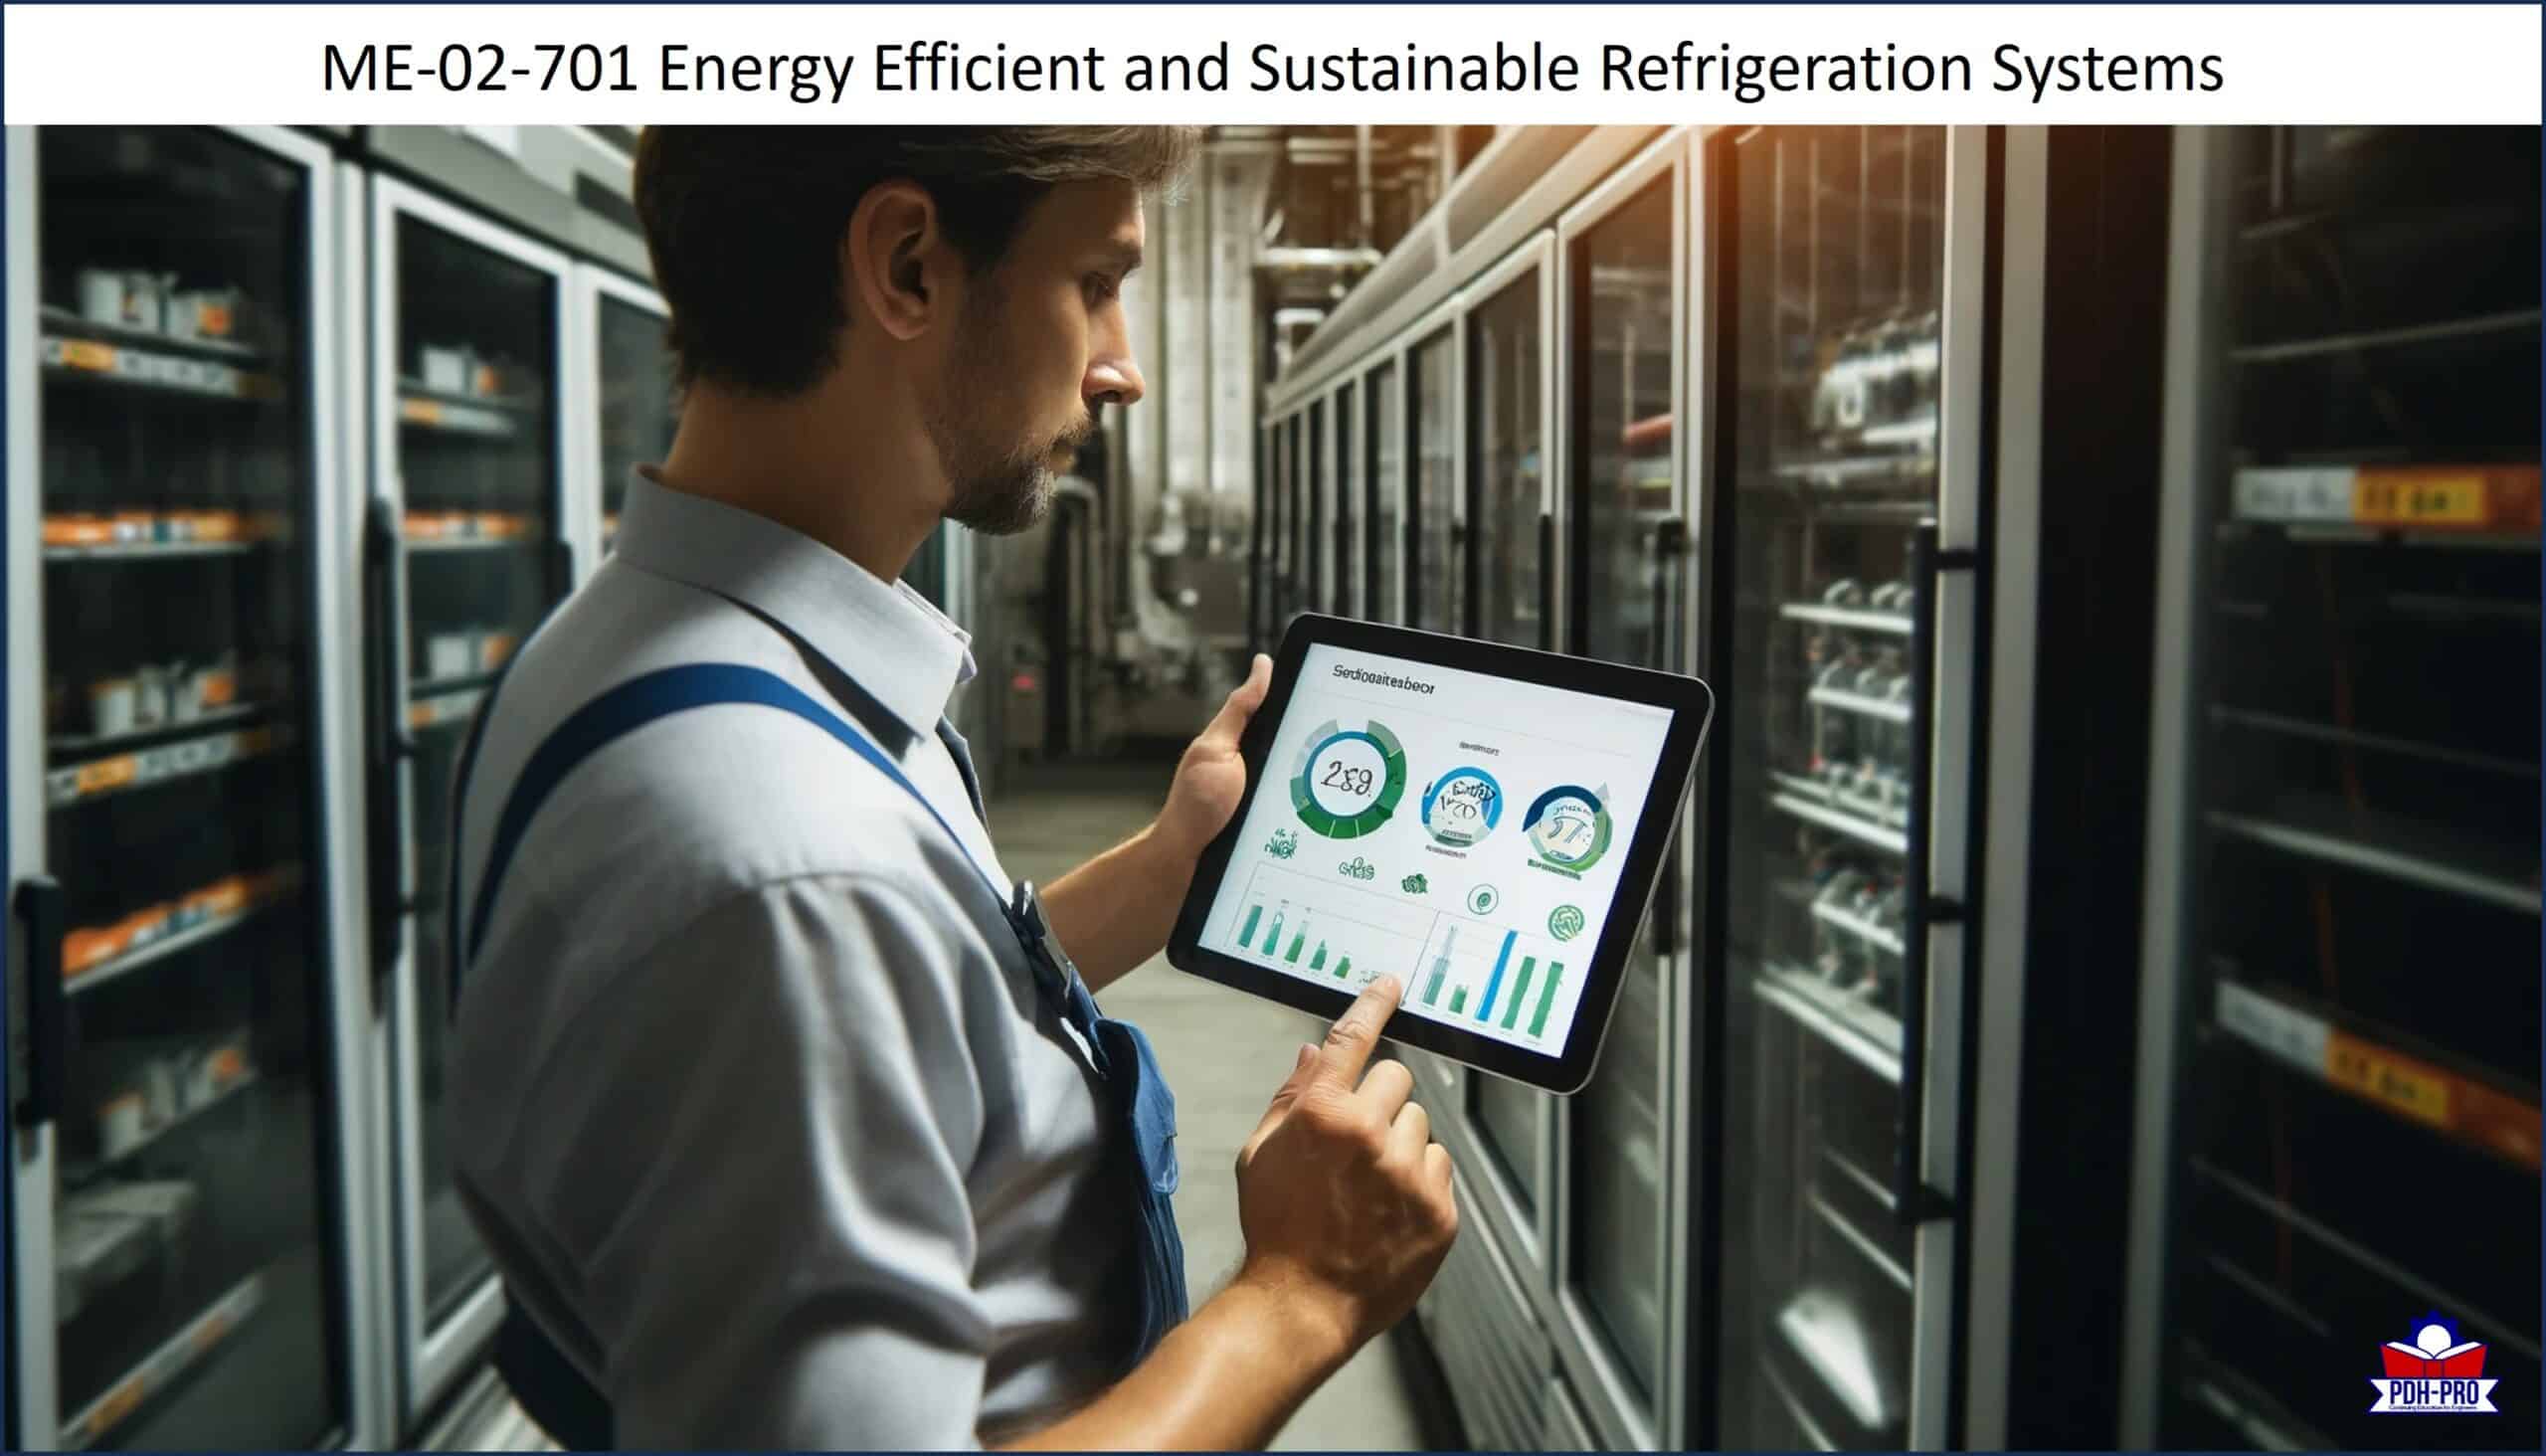 Energy Efficient and Sustainable Refrigeration Systems